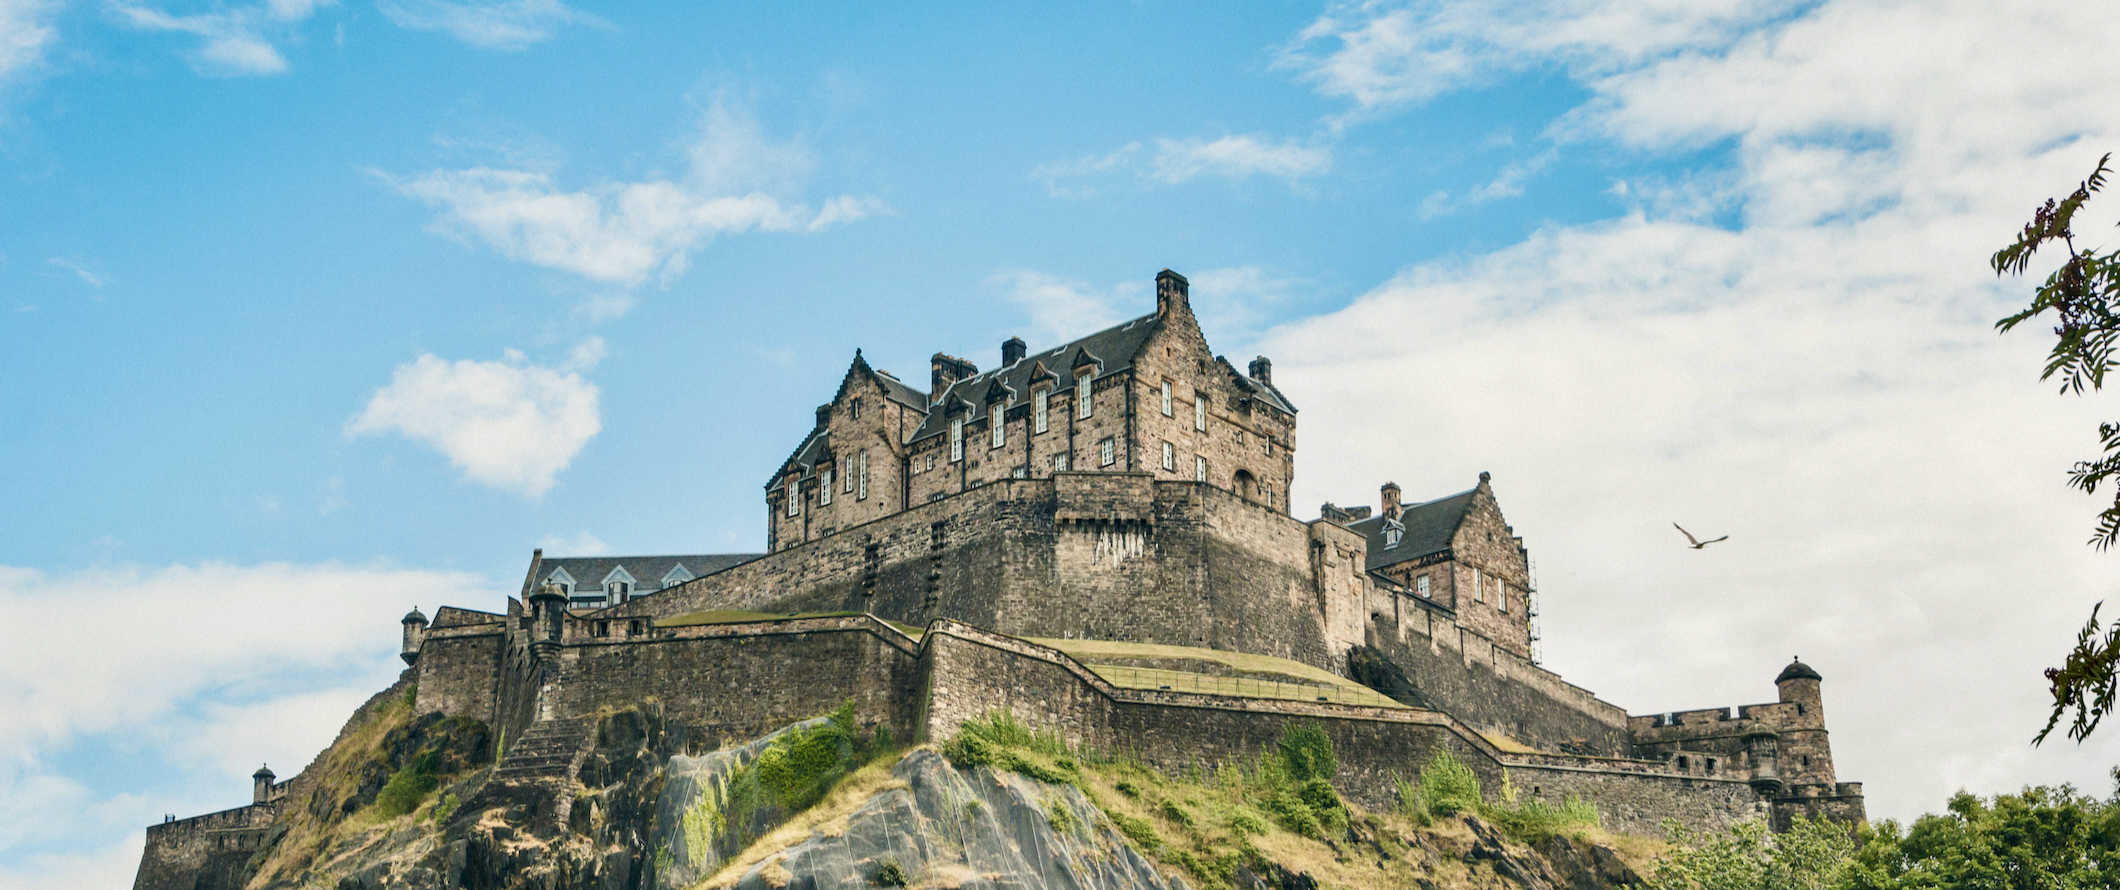 The towering Edinburgh Castle overlooking the city on a sunny day in Scotland